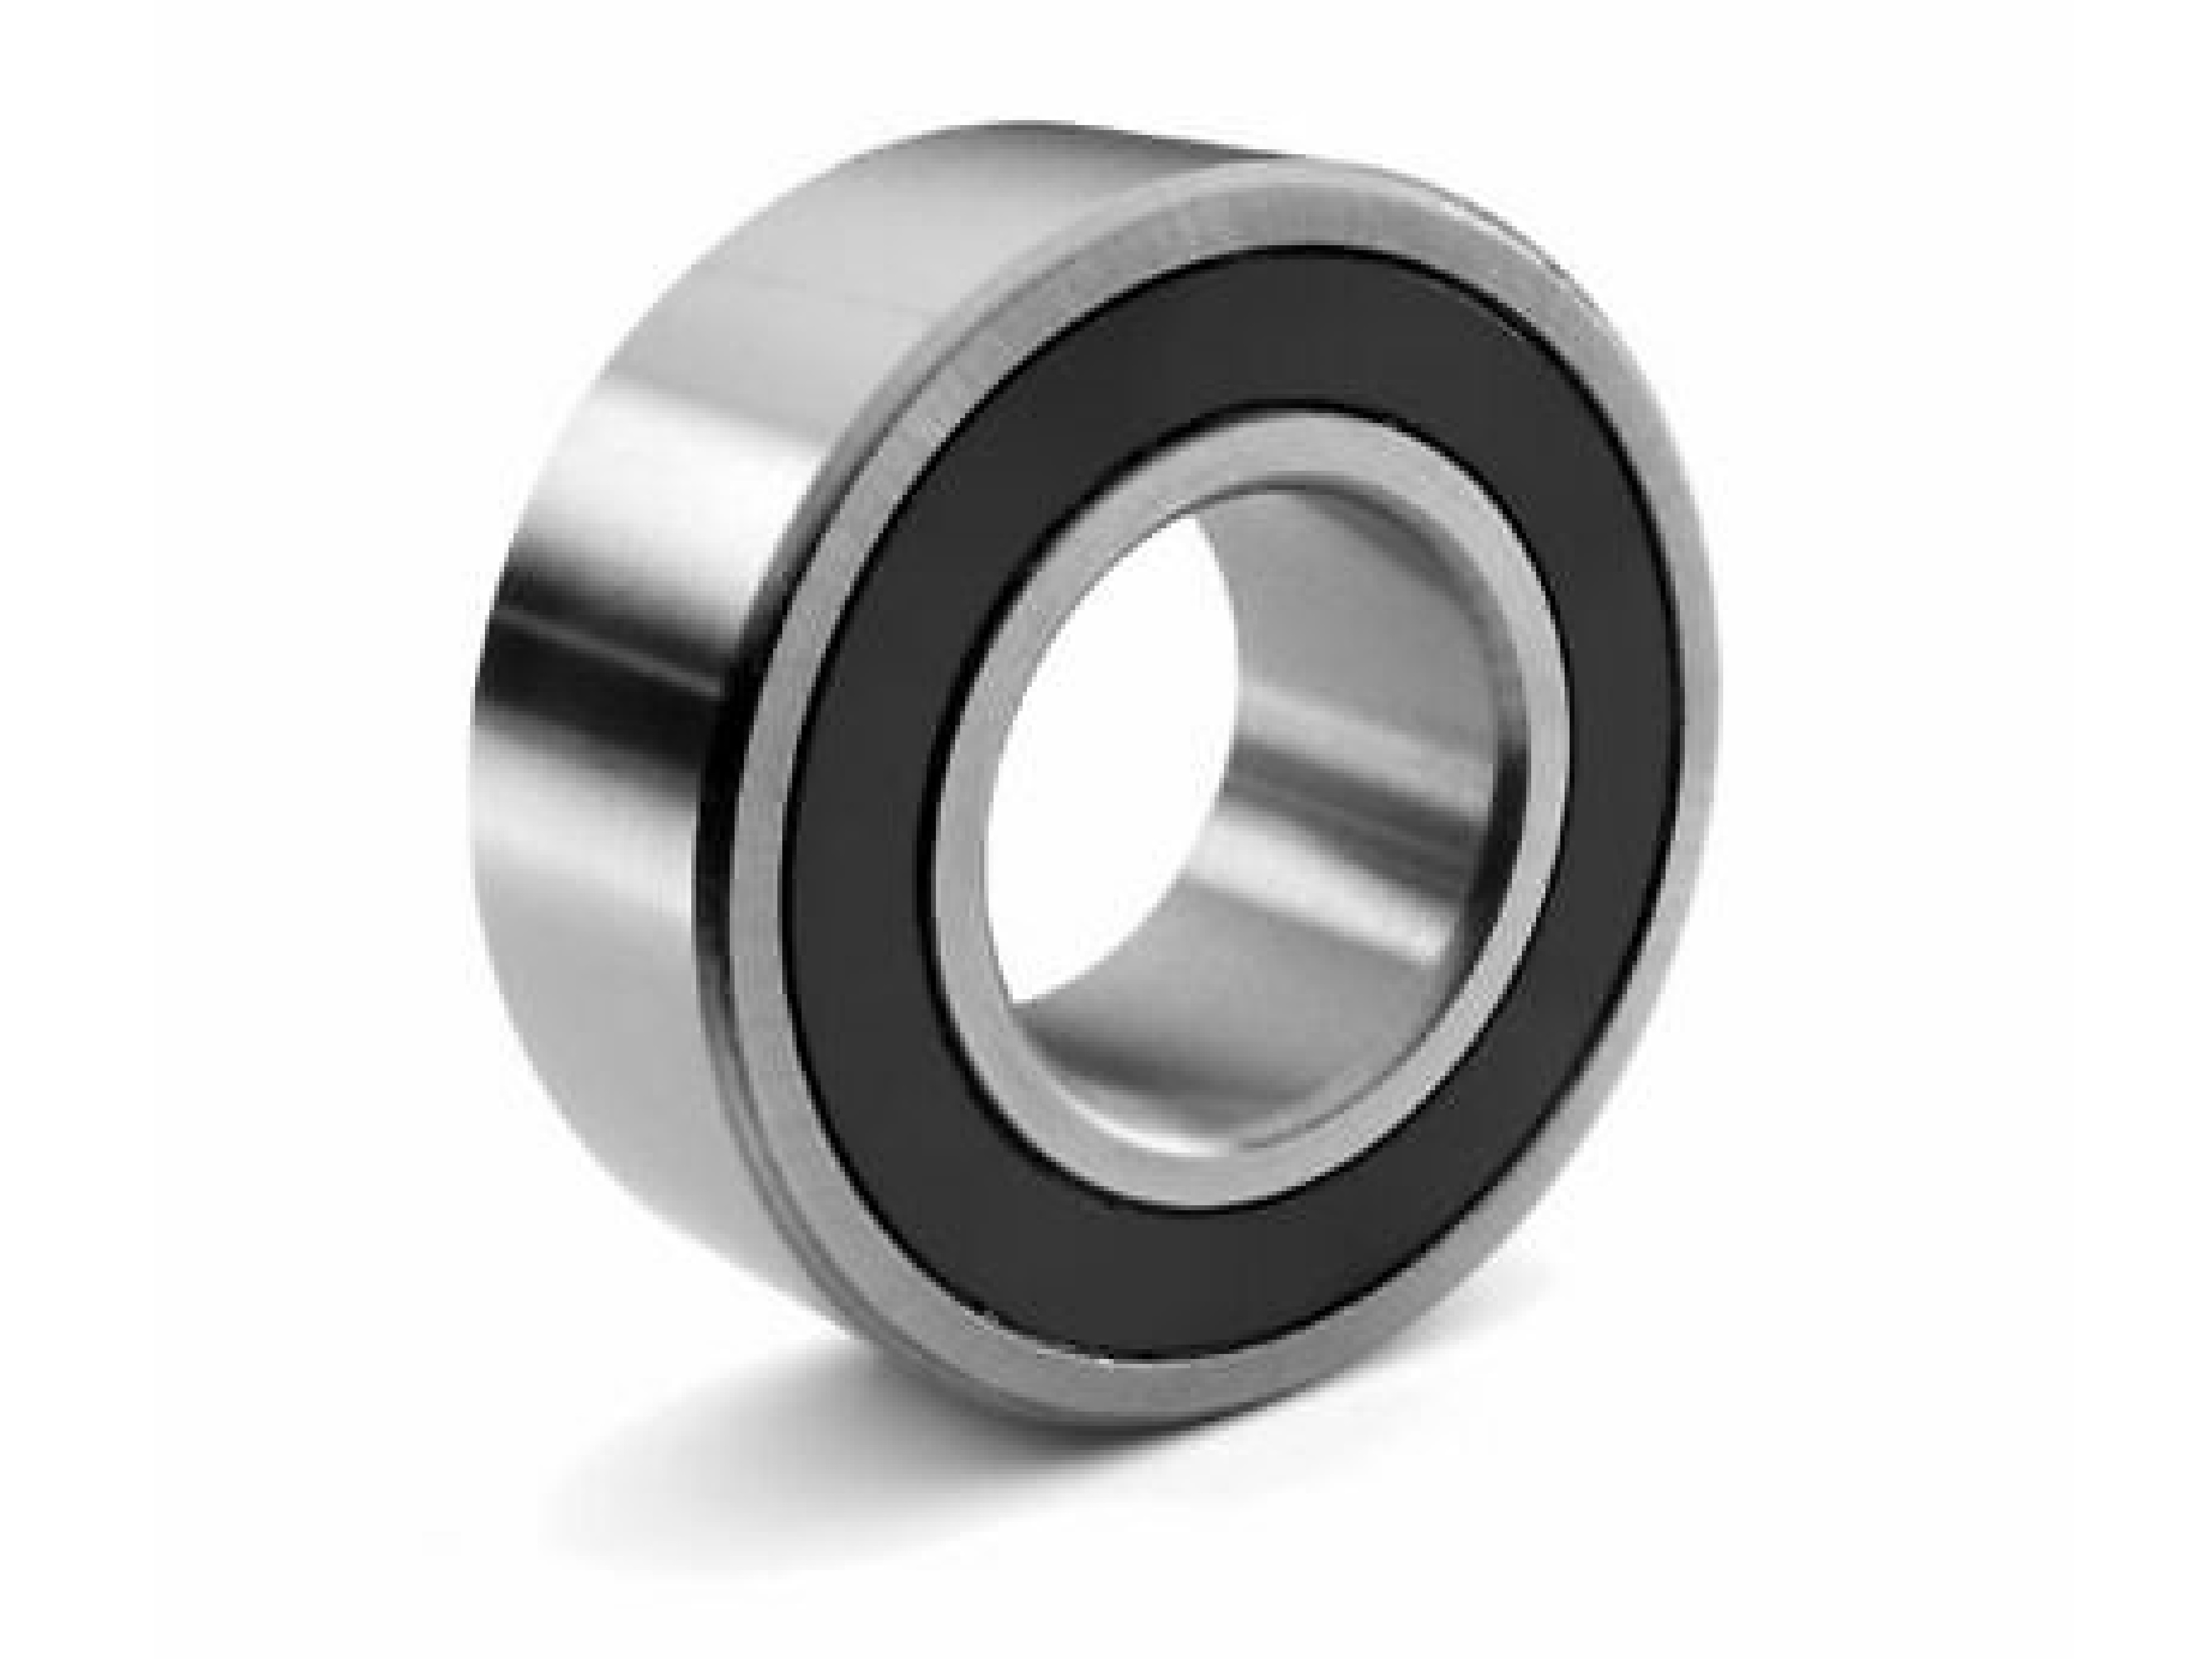 4209-2RS Sealed Double Row Ball Bearing 45mm x 85mm x 23mm